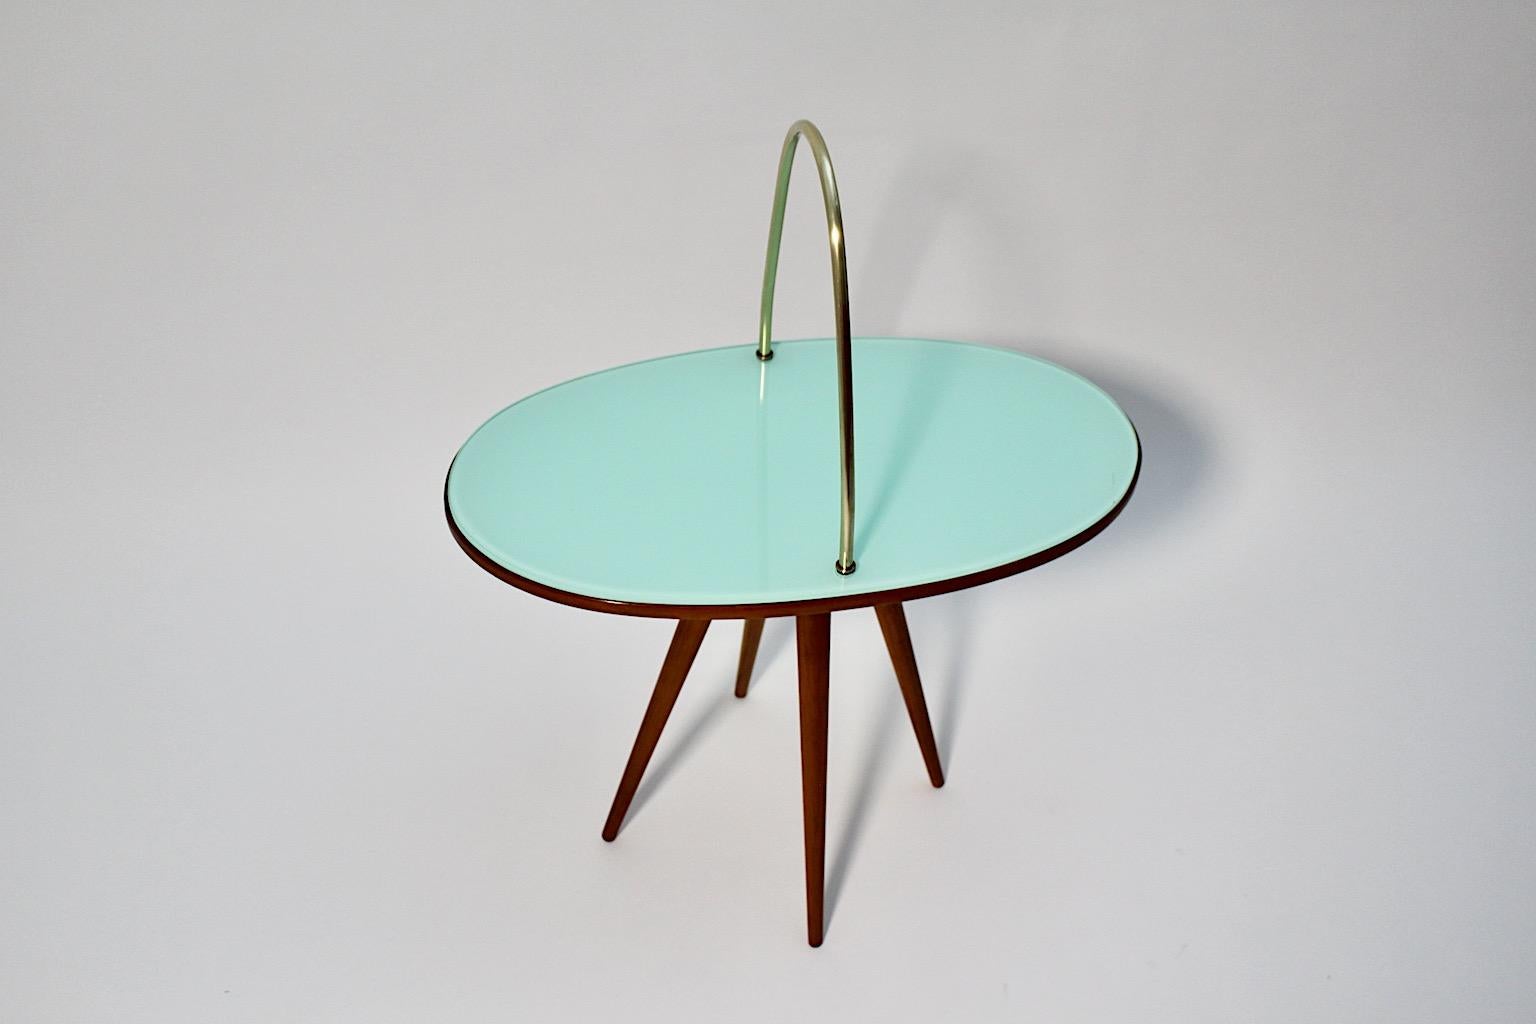 Mid-20th Century Mid-Century Modern Vintage Oval Cherry Brass Green Glass Side Table 1950s Italy For Sale